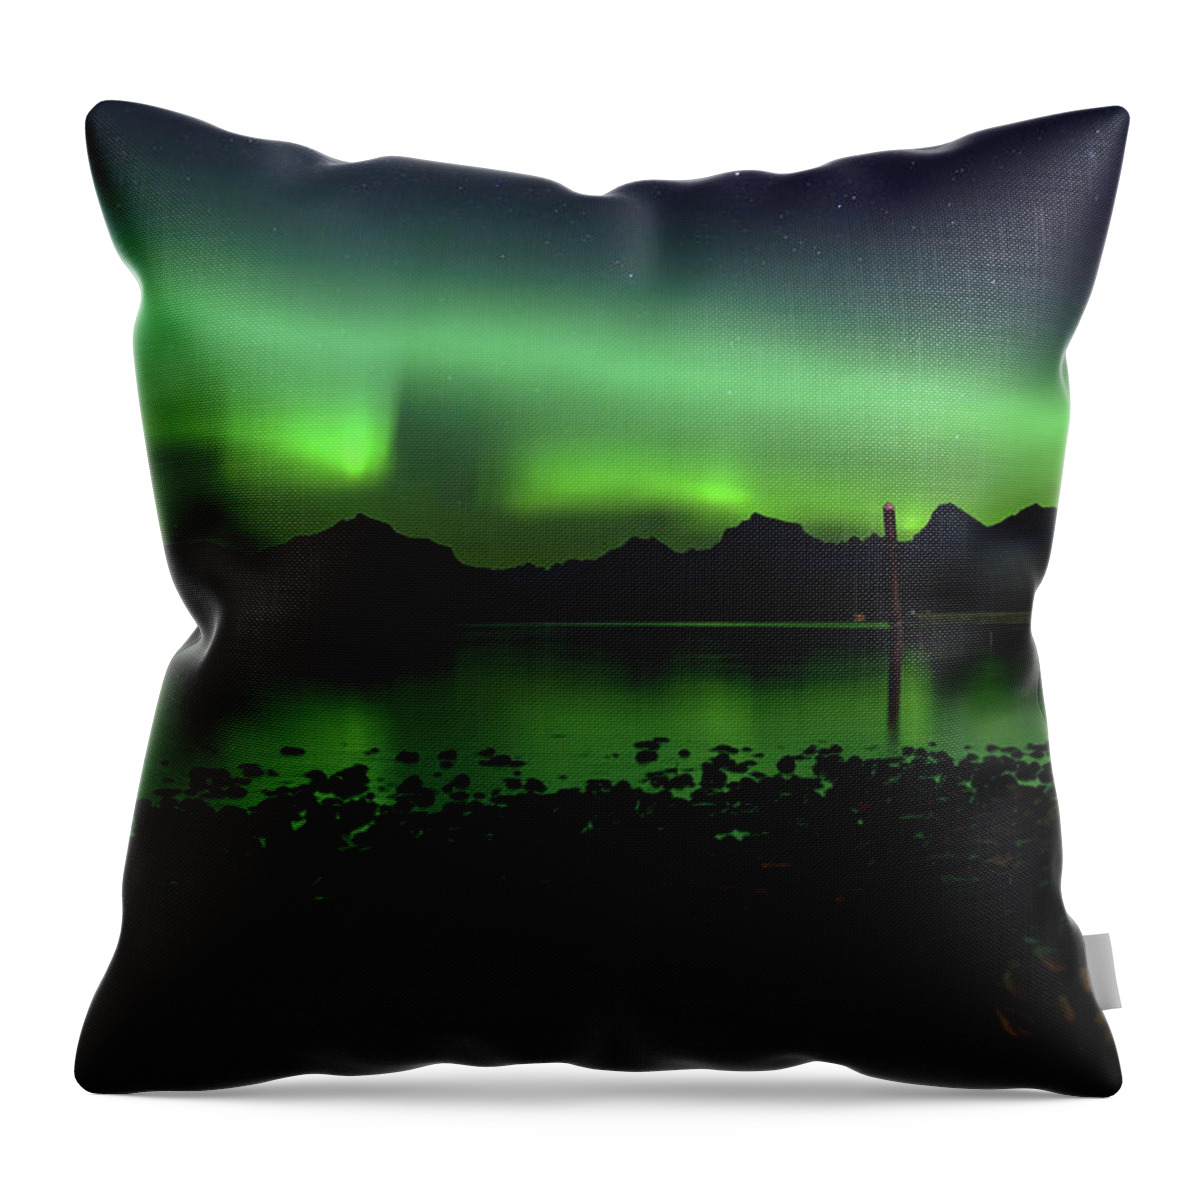  Throw Pillow featuring the photograph Aurora Borealis in Portrait by William Boggs